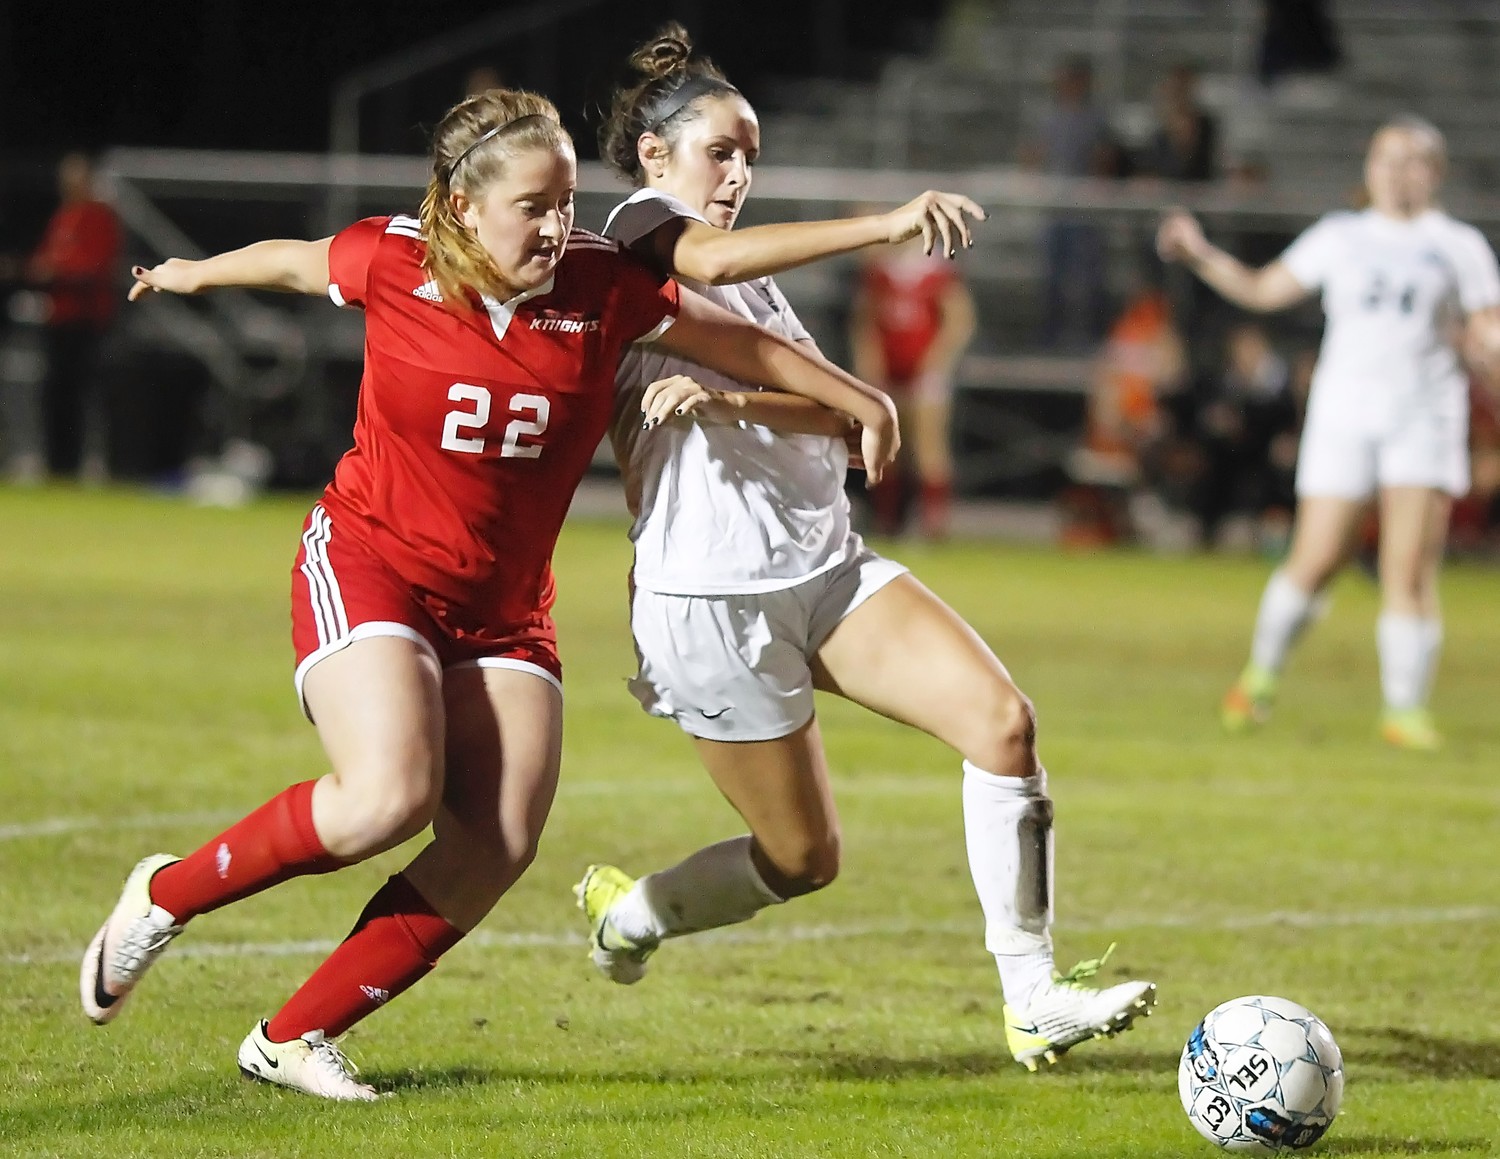 Piper Dotsikas fights to control the ball in front of the Creekside goal.